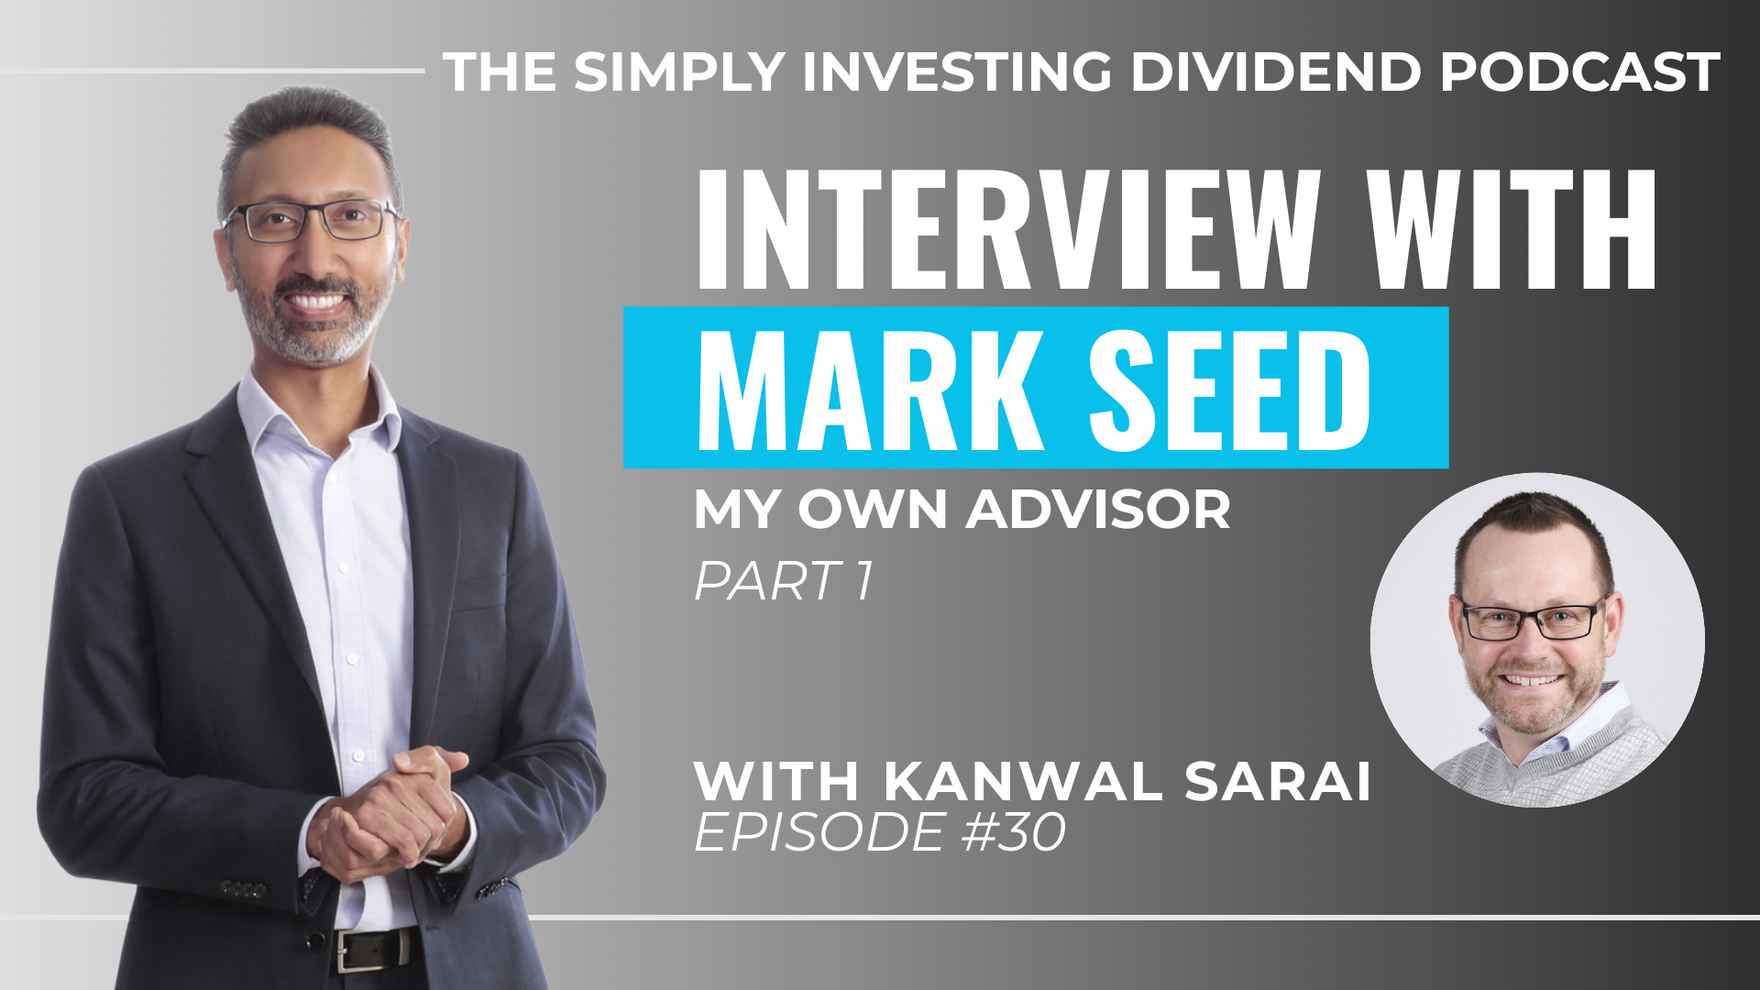 Simply Investing Dividend Podcast Episode 30 - Interview with Mark Seed of My Own Advisor